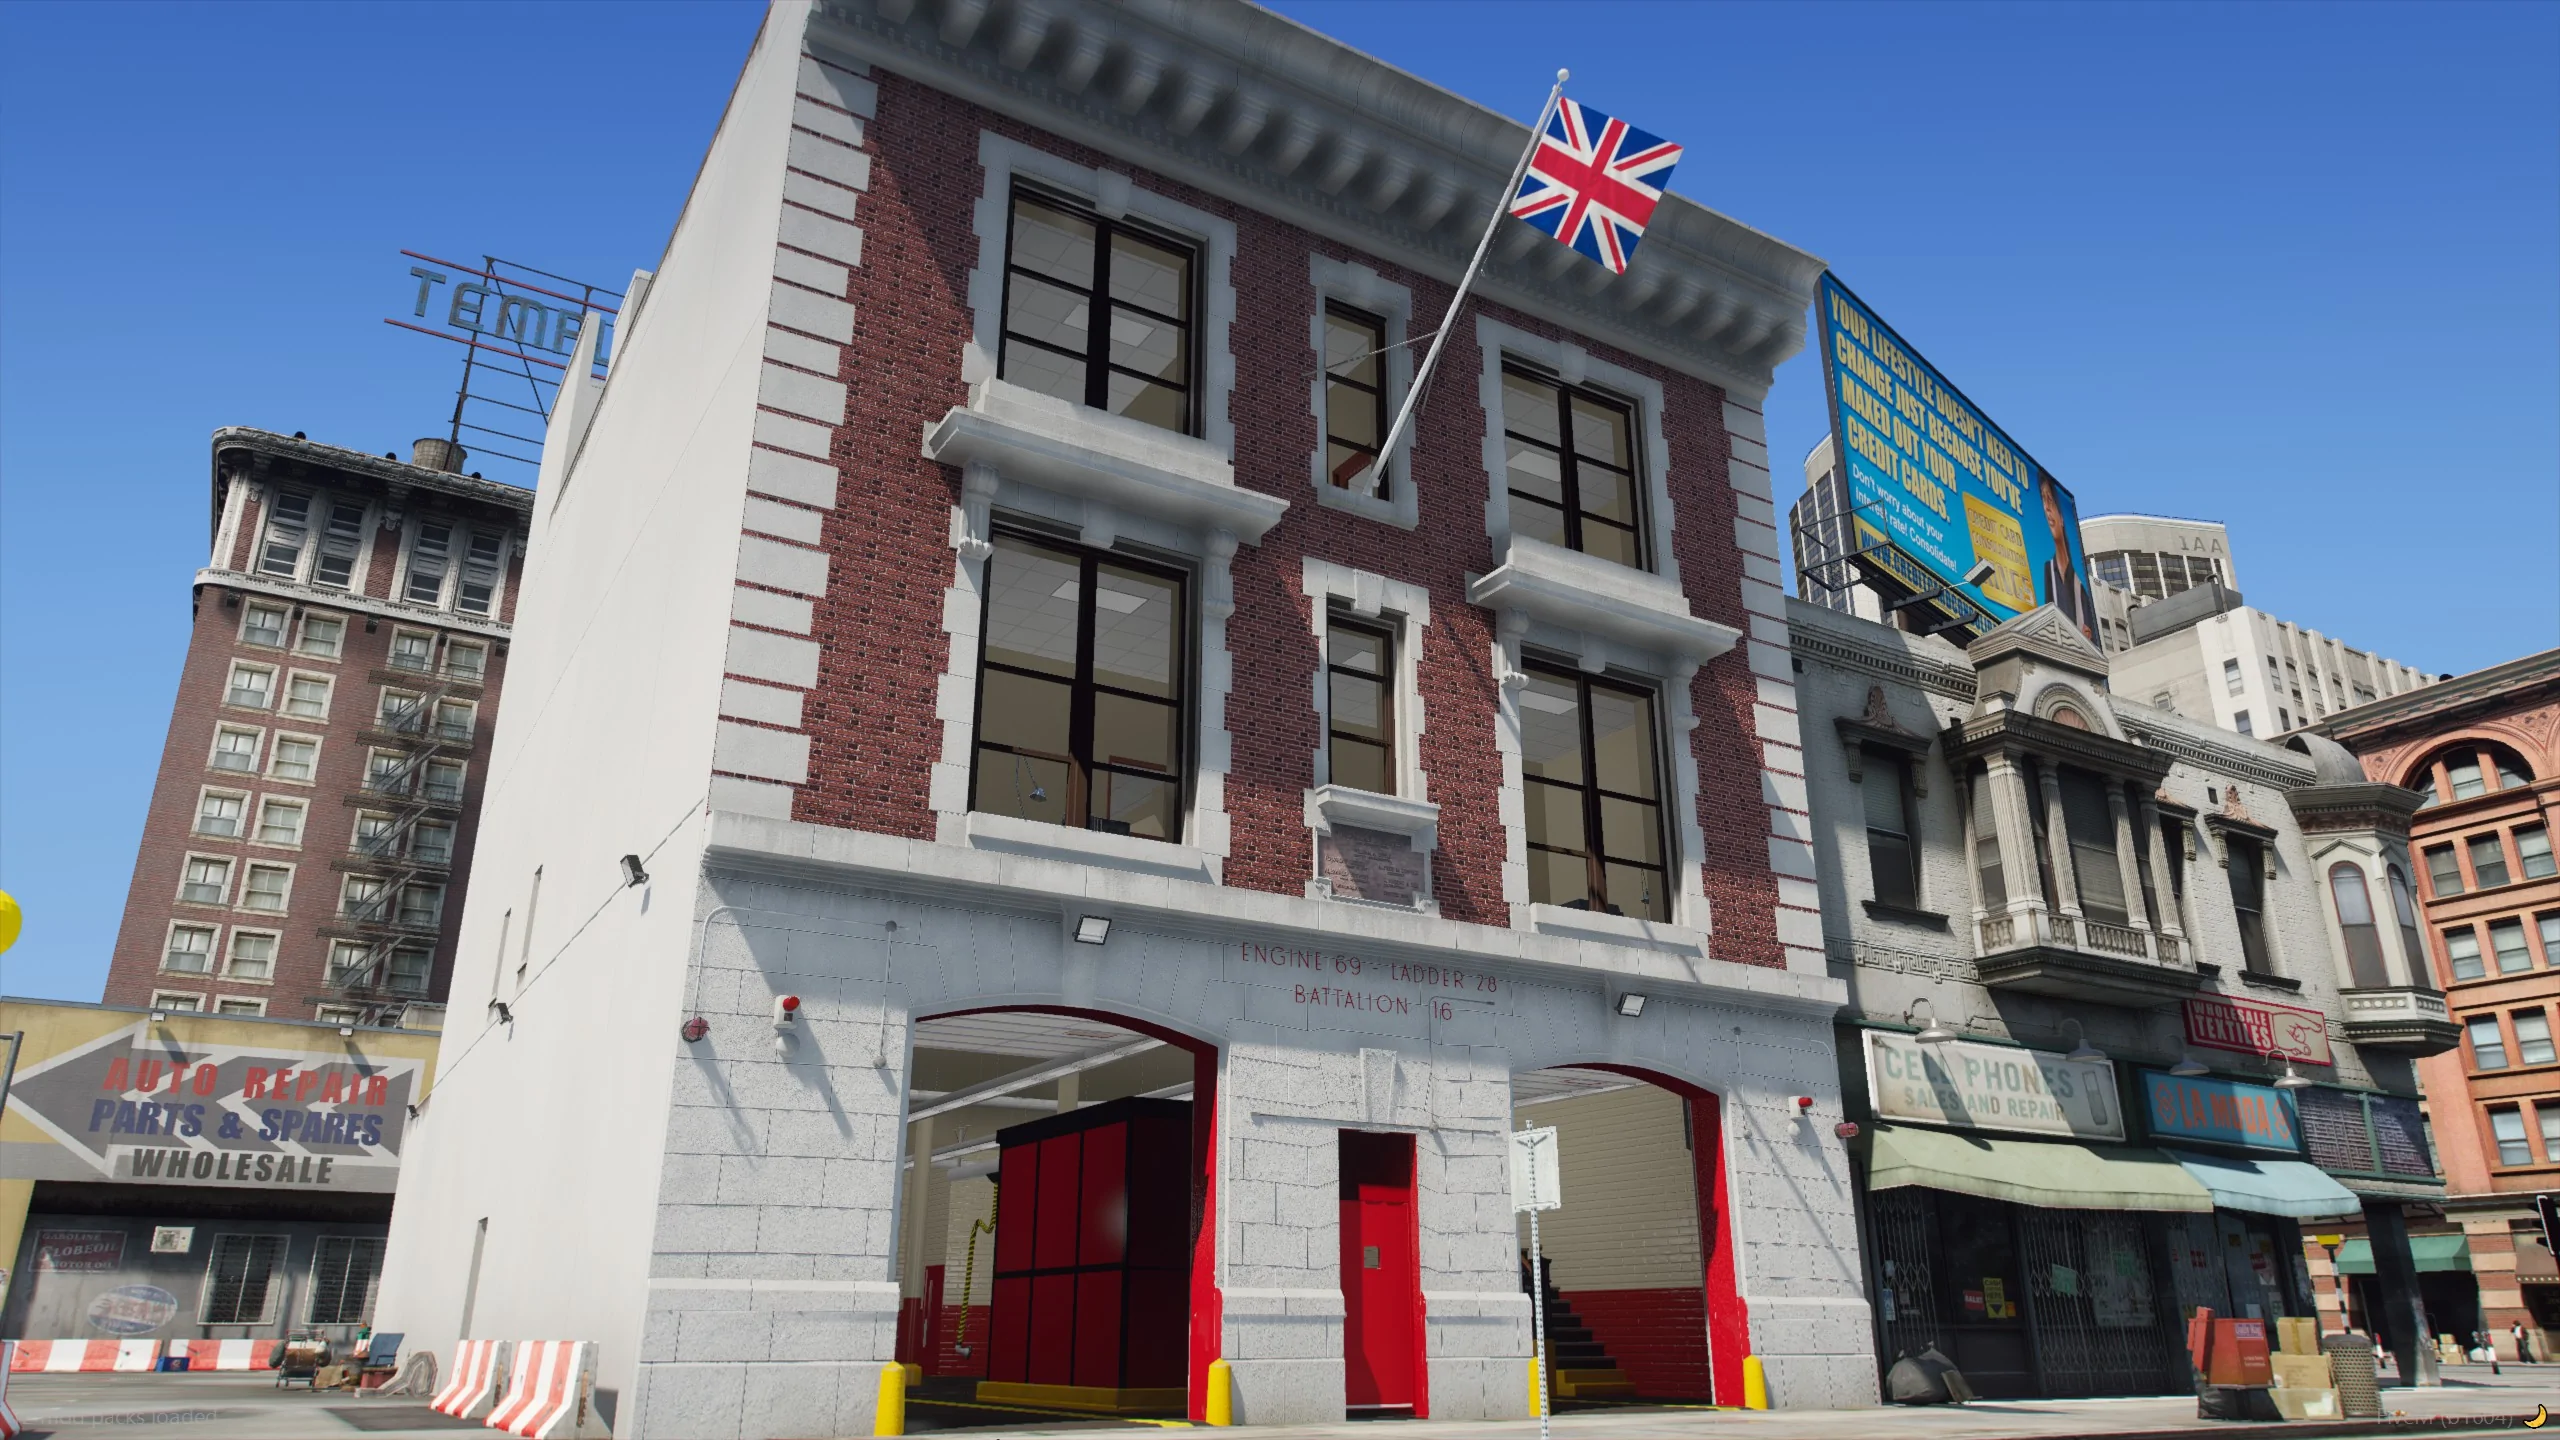 More information about "FDNY Style Fire Station"